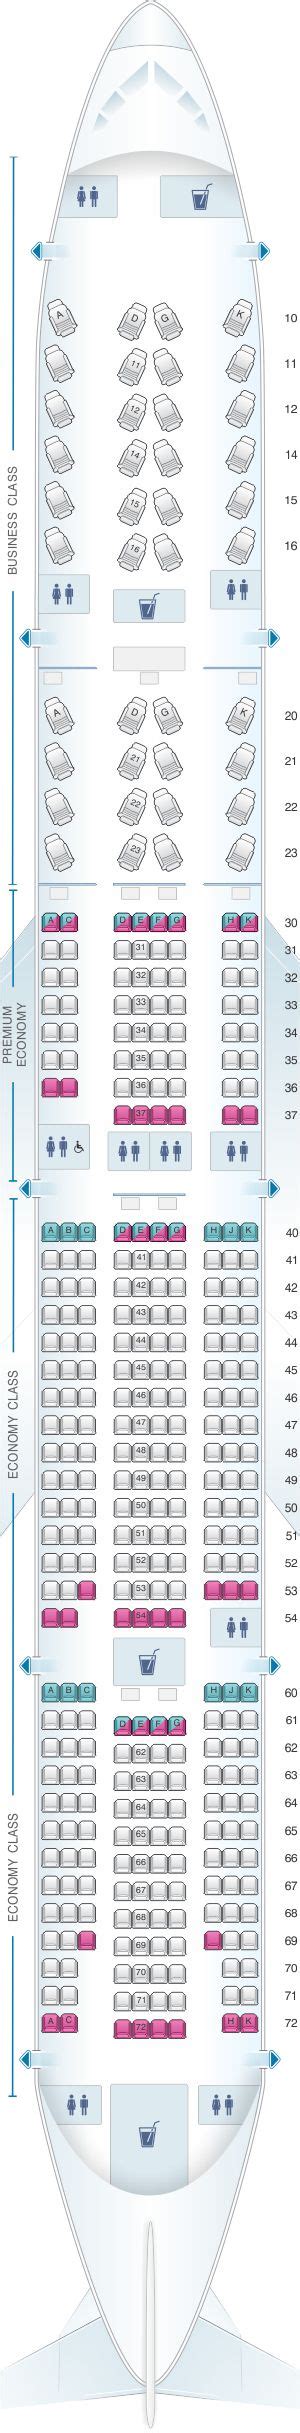 Seat Map China Airlines Boeing B777 300er China Airlines Thai